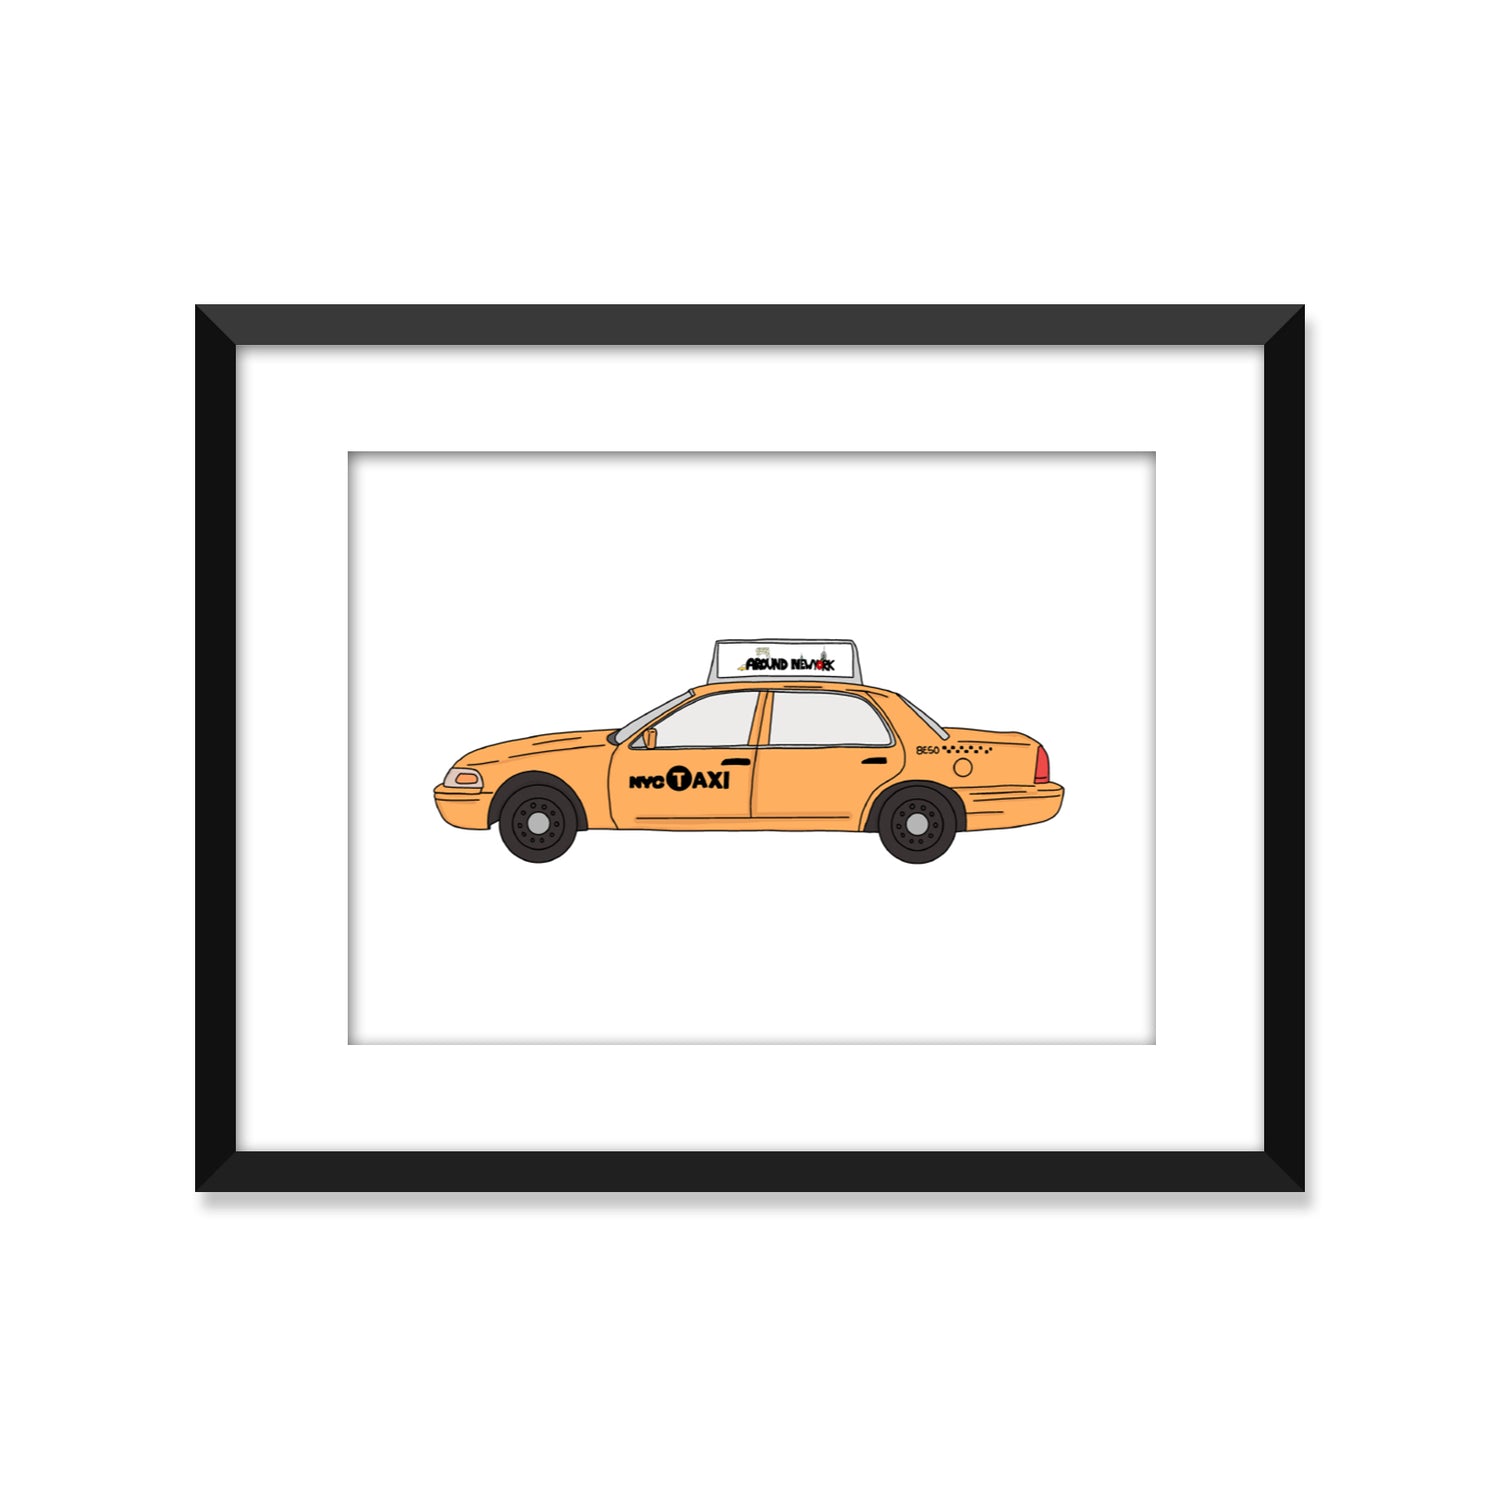 Around New York Taxi - Unframed Art Print Or Greeting Card